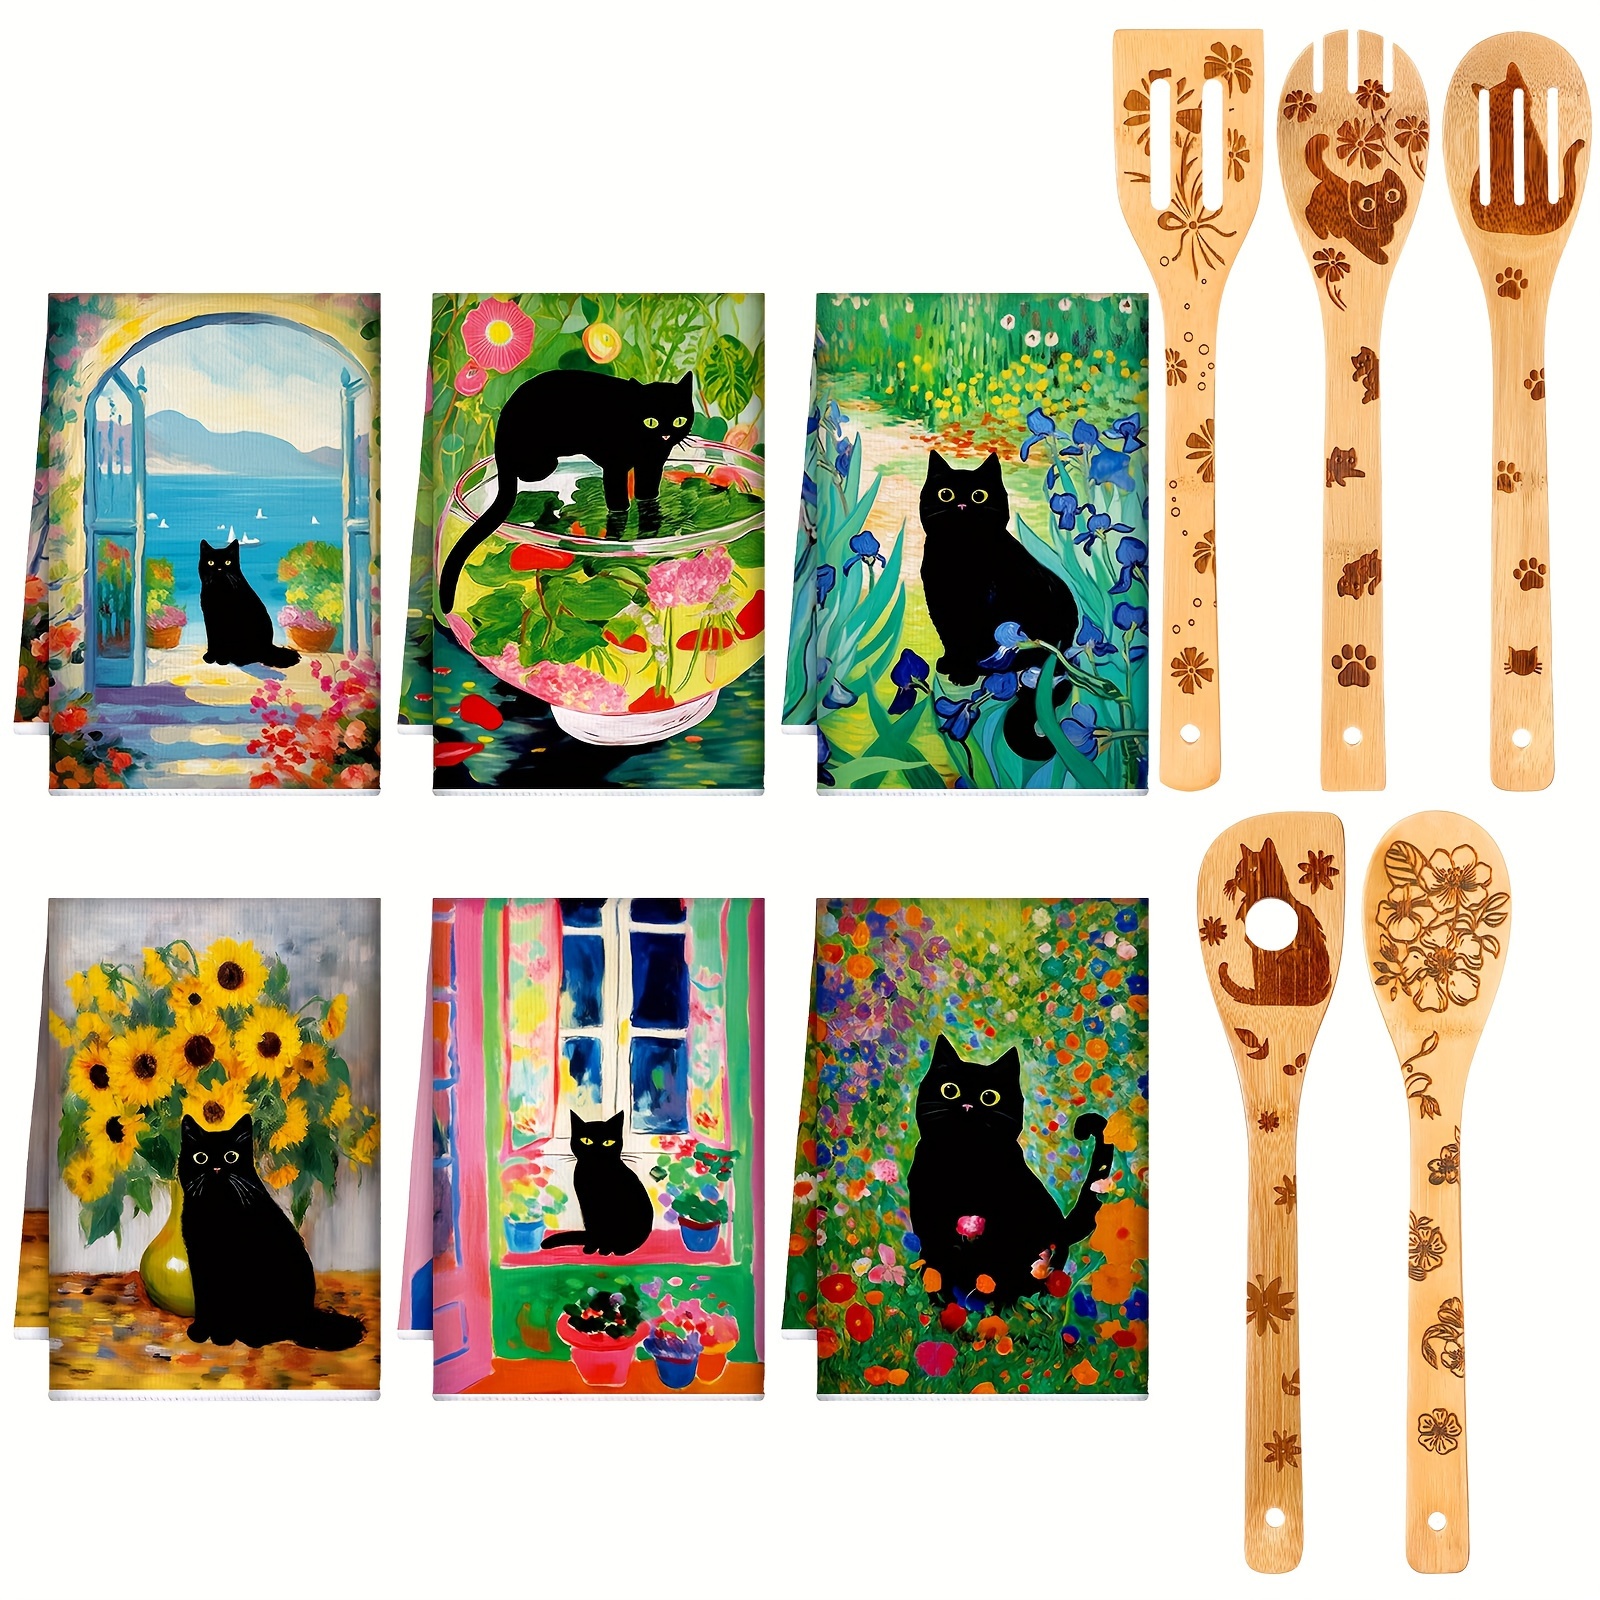 

11 Pcs Kitchen Decor Bee 6 Kitchen Dish Towels And 5 Wooden Spoons Set Cat Hand Towel Cat Themed Gifts For Bathroom Home Housewarming Gifts (cat Style)